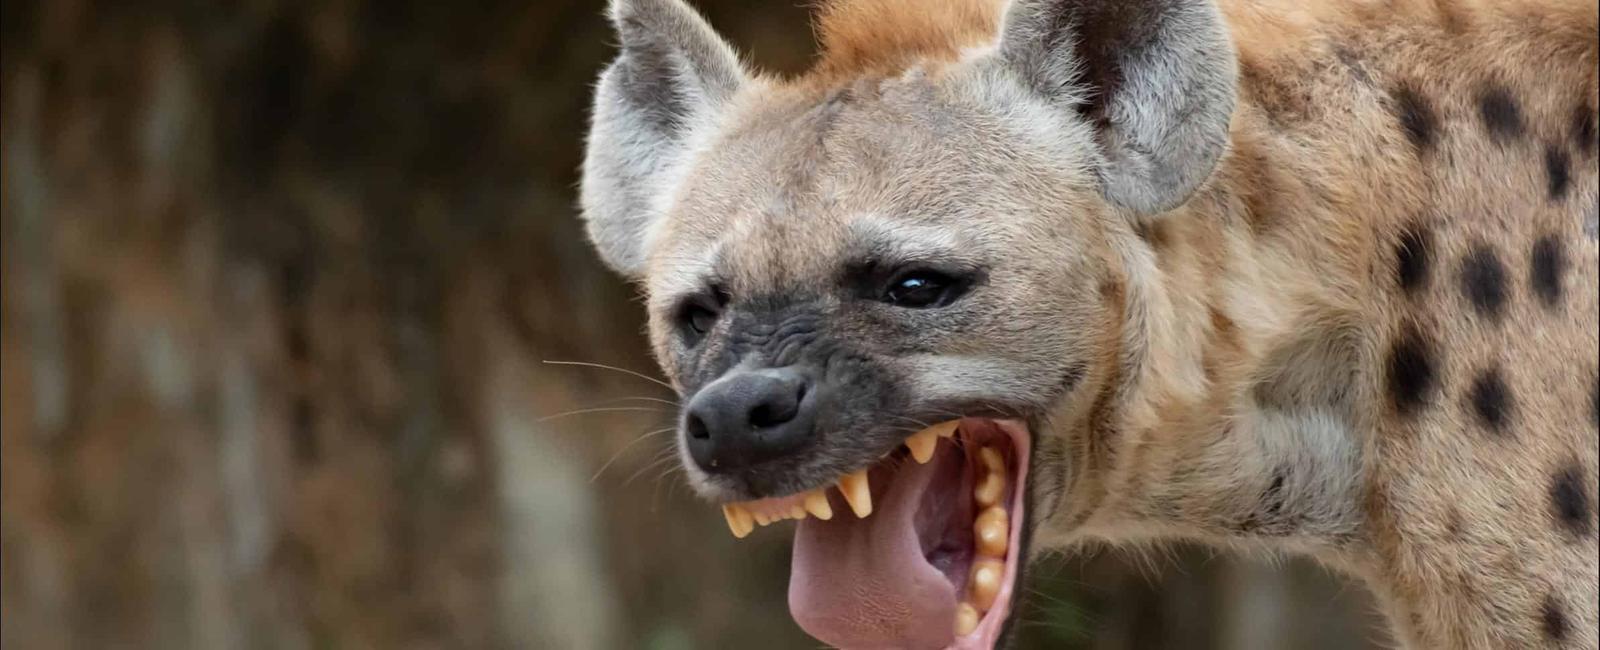 Hyenas are more closely related to cats than they are to dogs